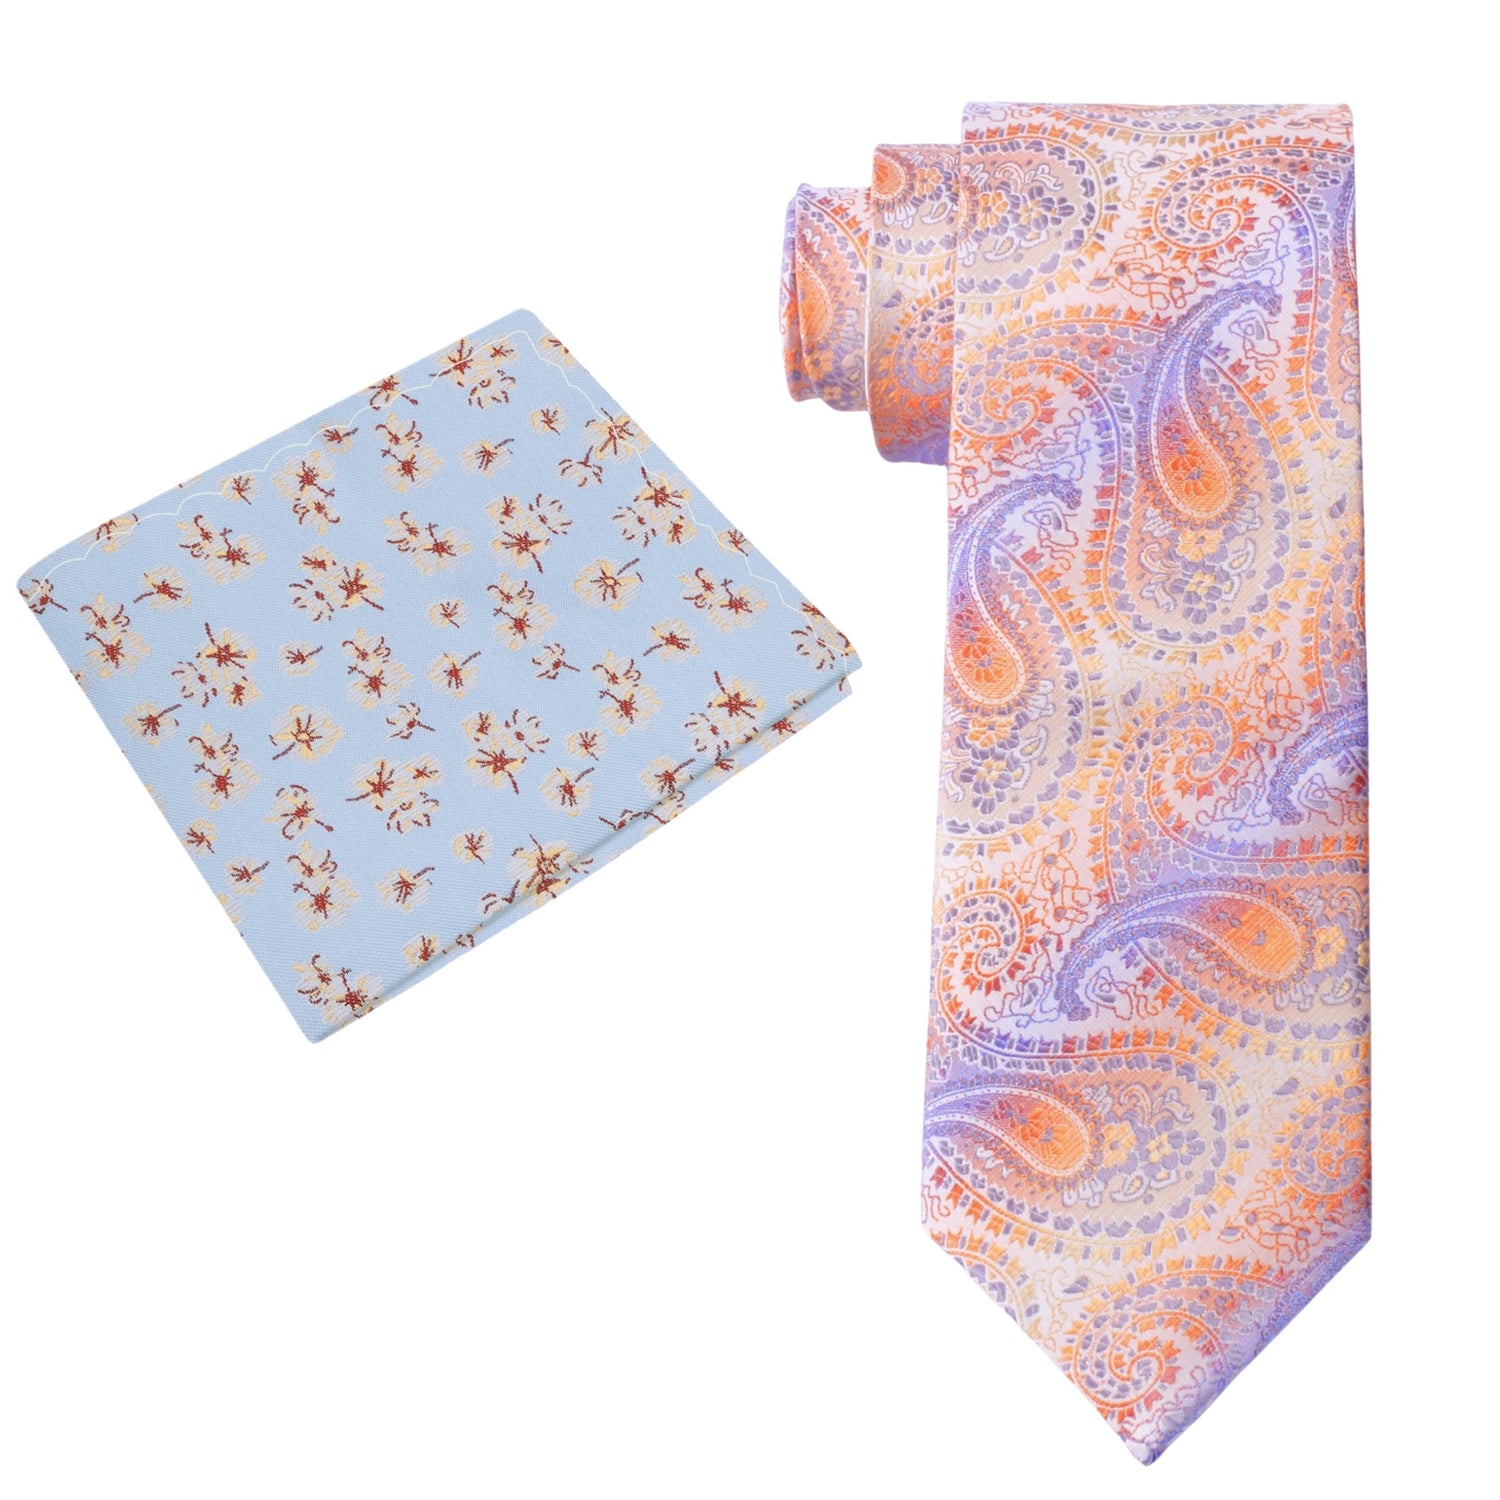 Alt View: Shades of Pastel Orange and Purple Paisley with Light Blue Floral Square